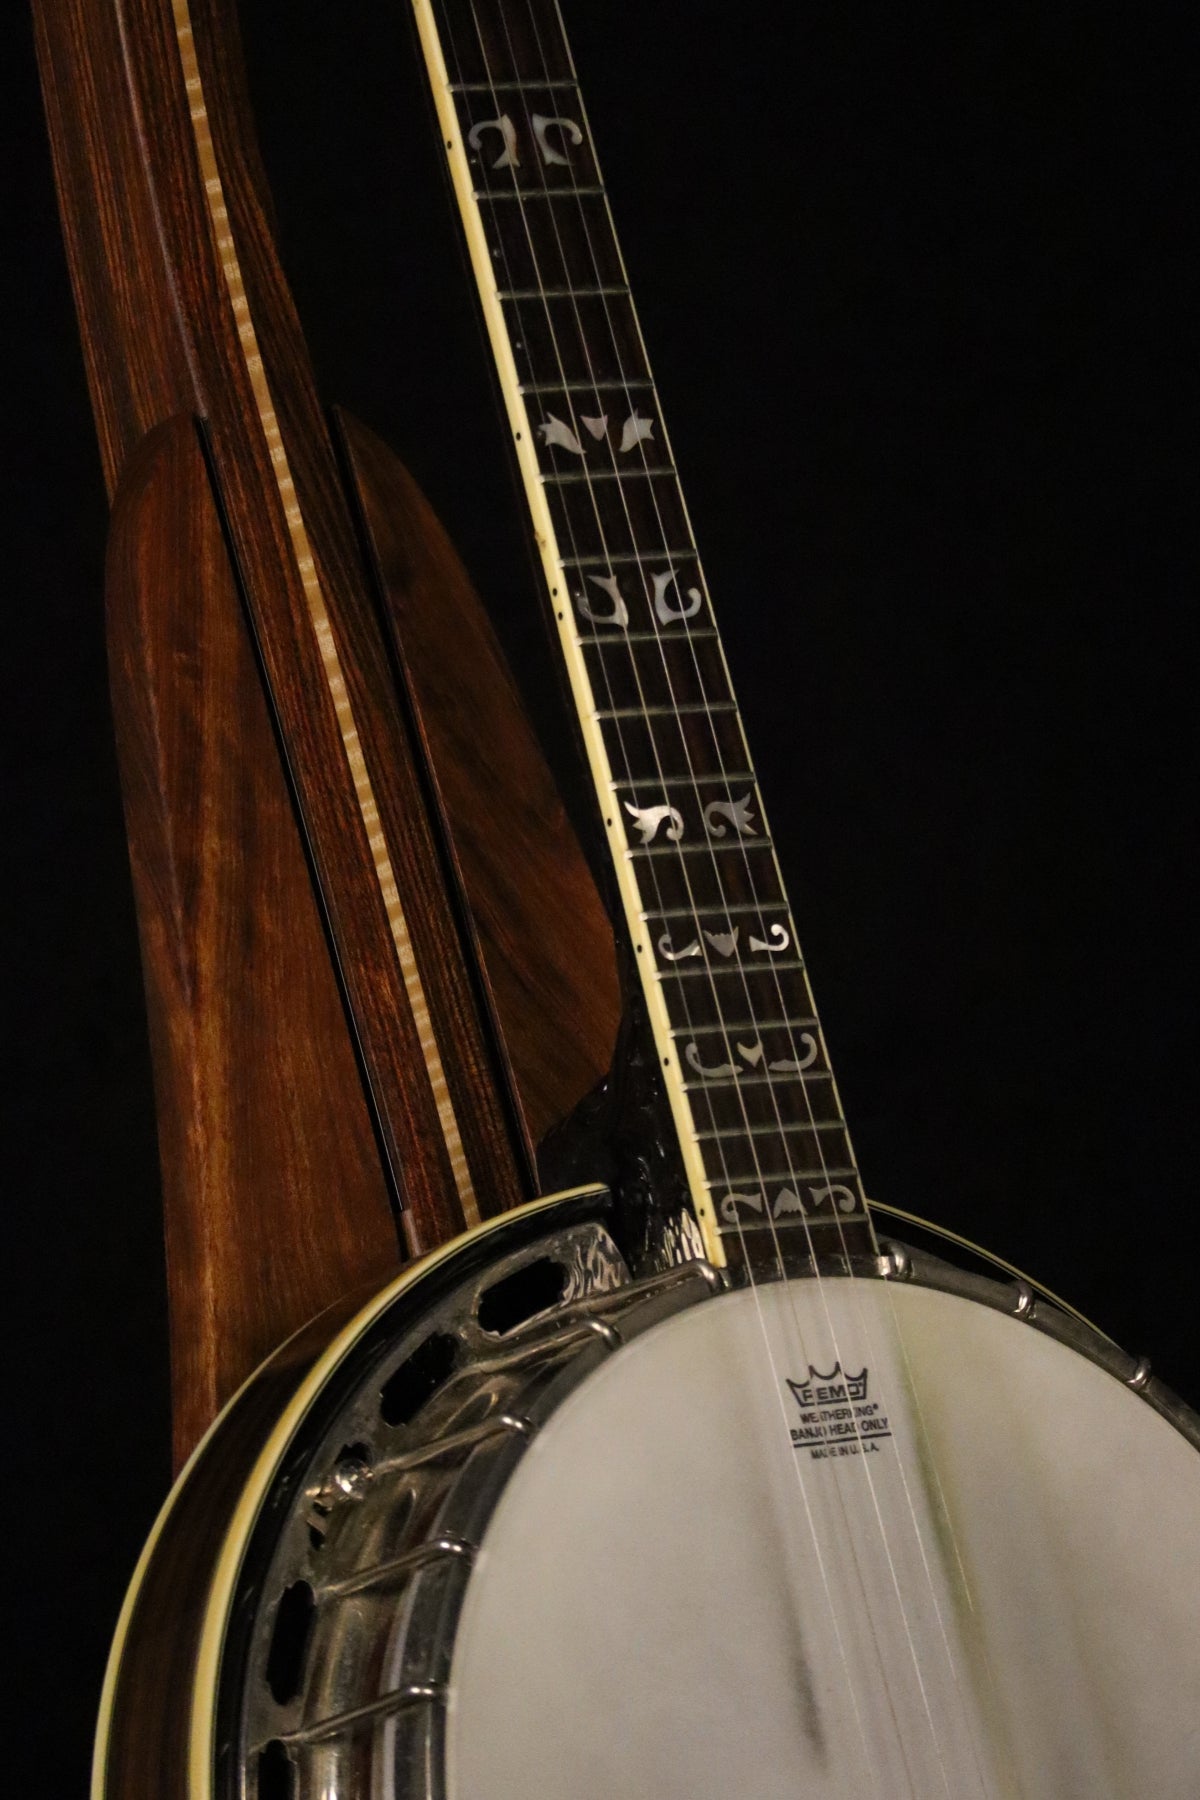 Folding chechen Caribbean rosewood and curly maple wood banjo floor stand closeup front image with Alvarez banjo